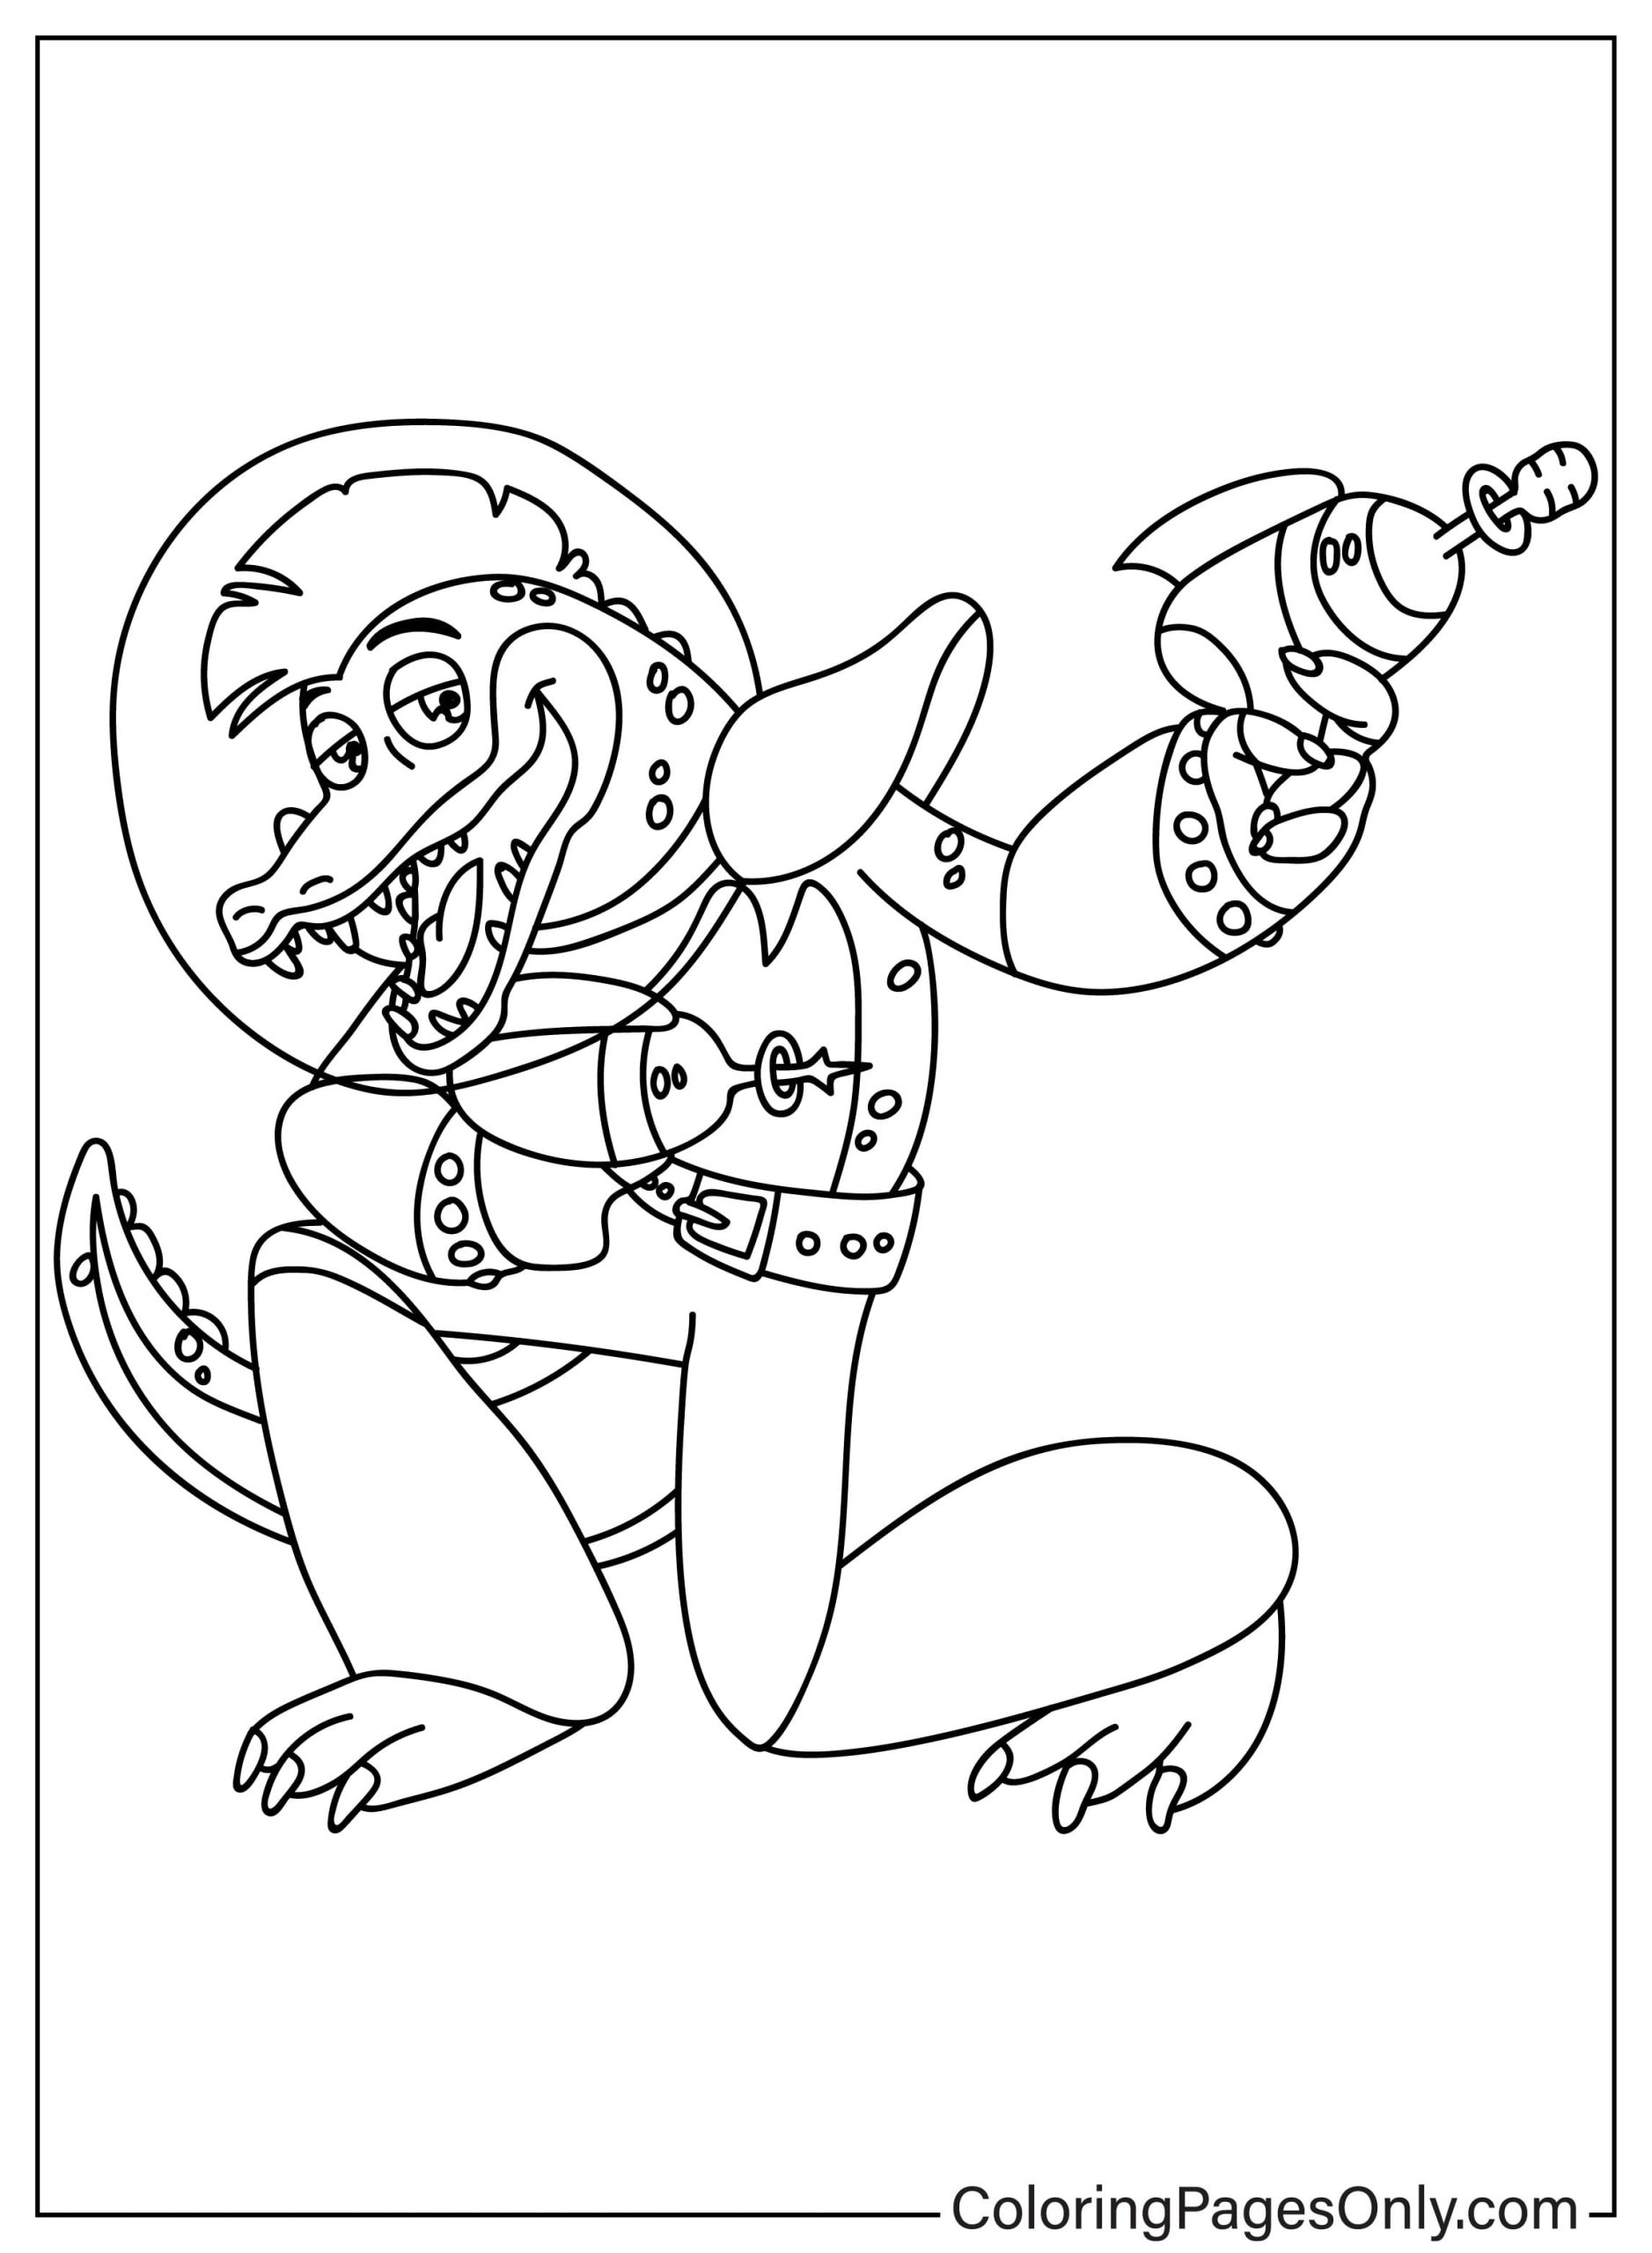 Montgomery Gator Coloring Page Free from Five Nights At Freddy's 2